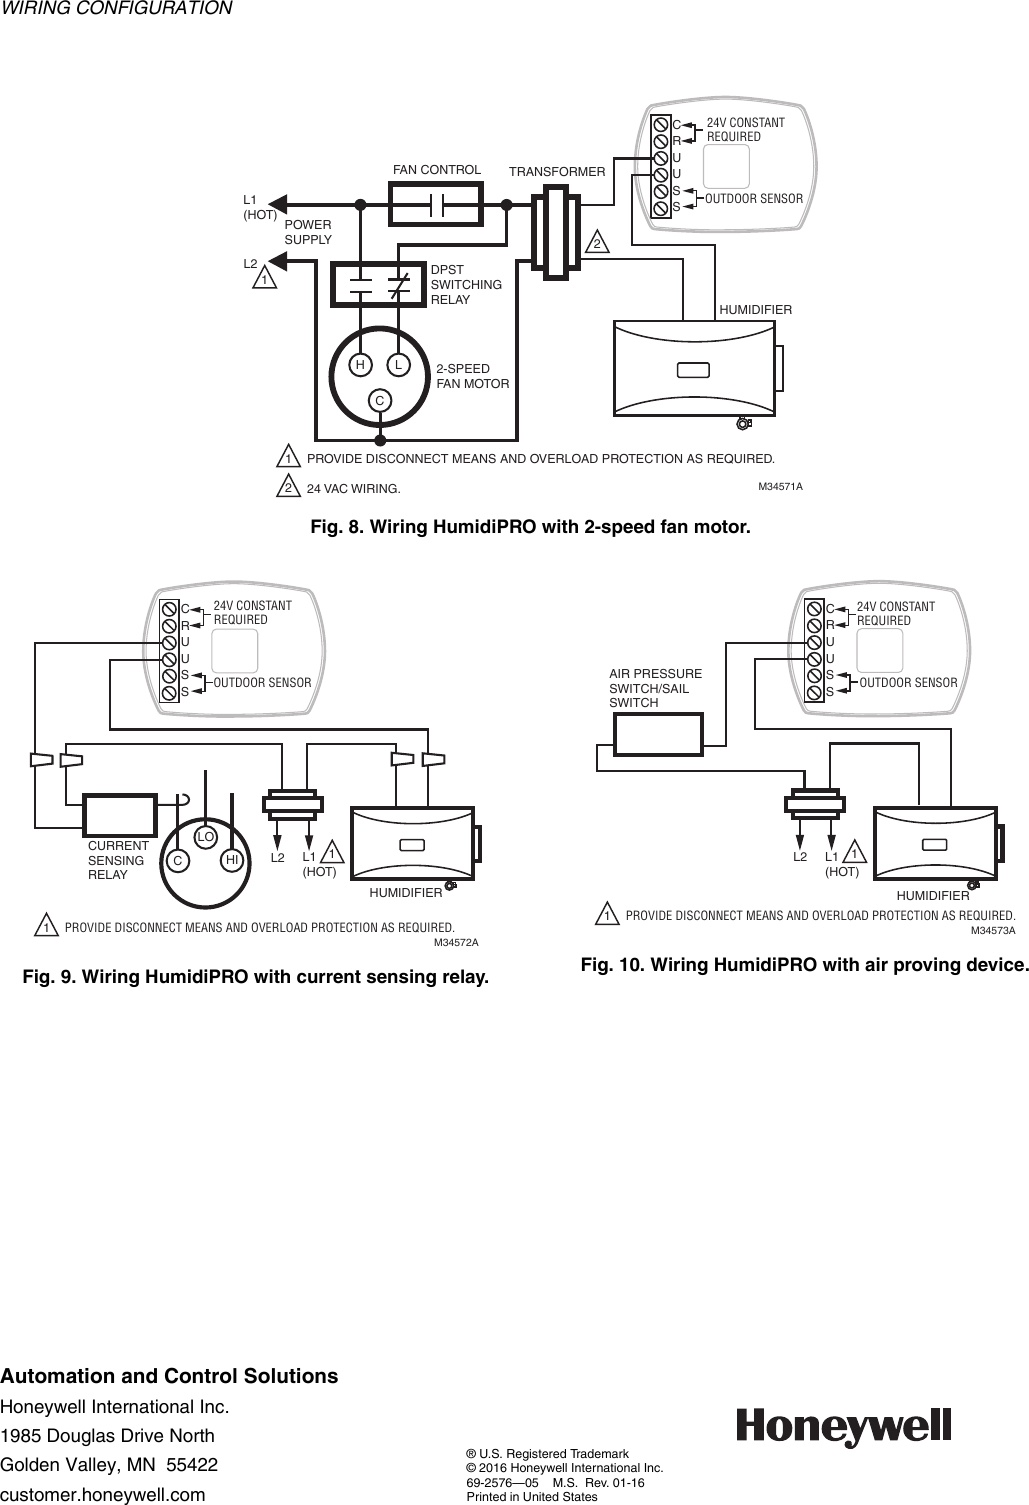 Ecobee Humidifier Wiring Diagram from usermanual.wiki